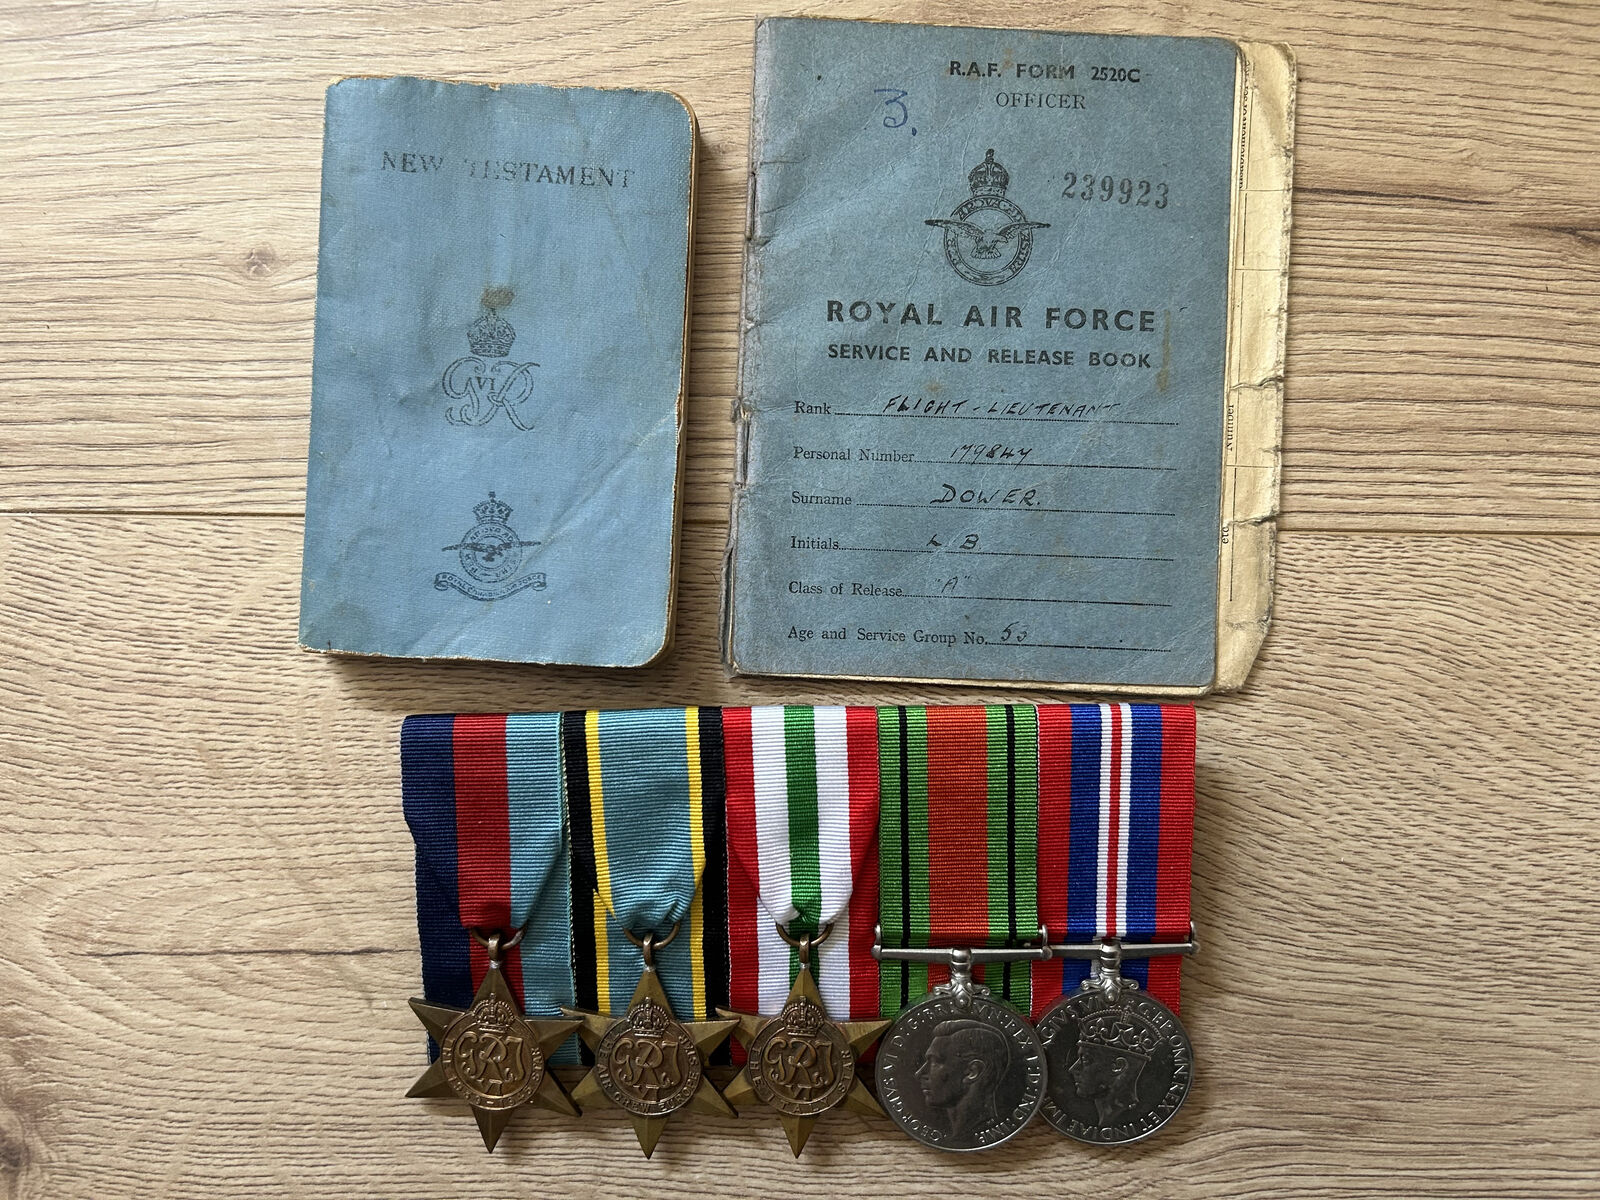 A WW2 RAF Air crew Europe Bomber Command Medal Group with Pay book